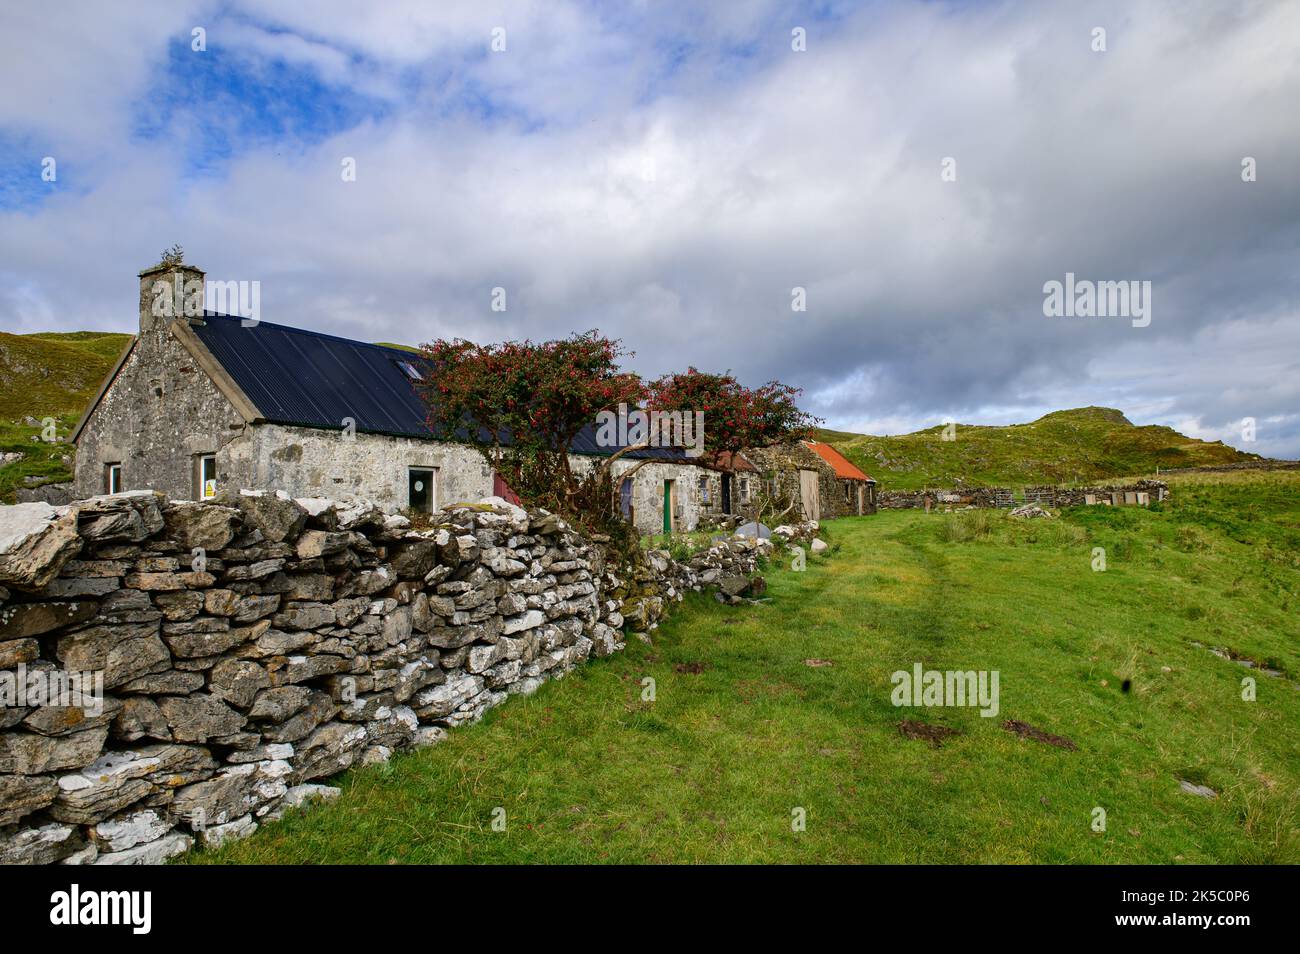 The farmstead at Dalnarrow on the southern end of The Isle of Lismore, Argyll and Bute, Scotland Stock Photo